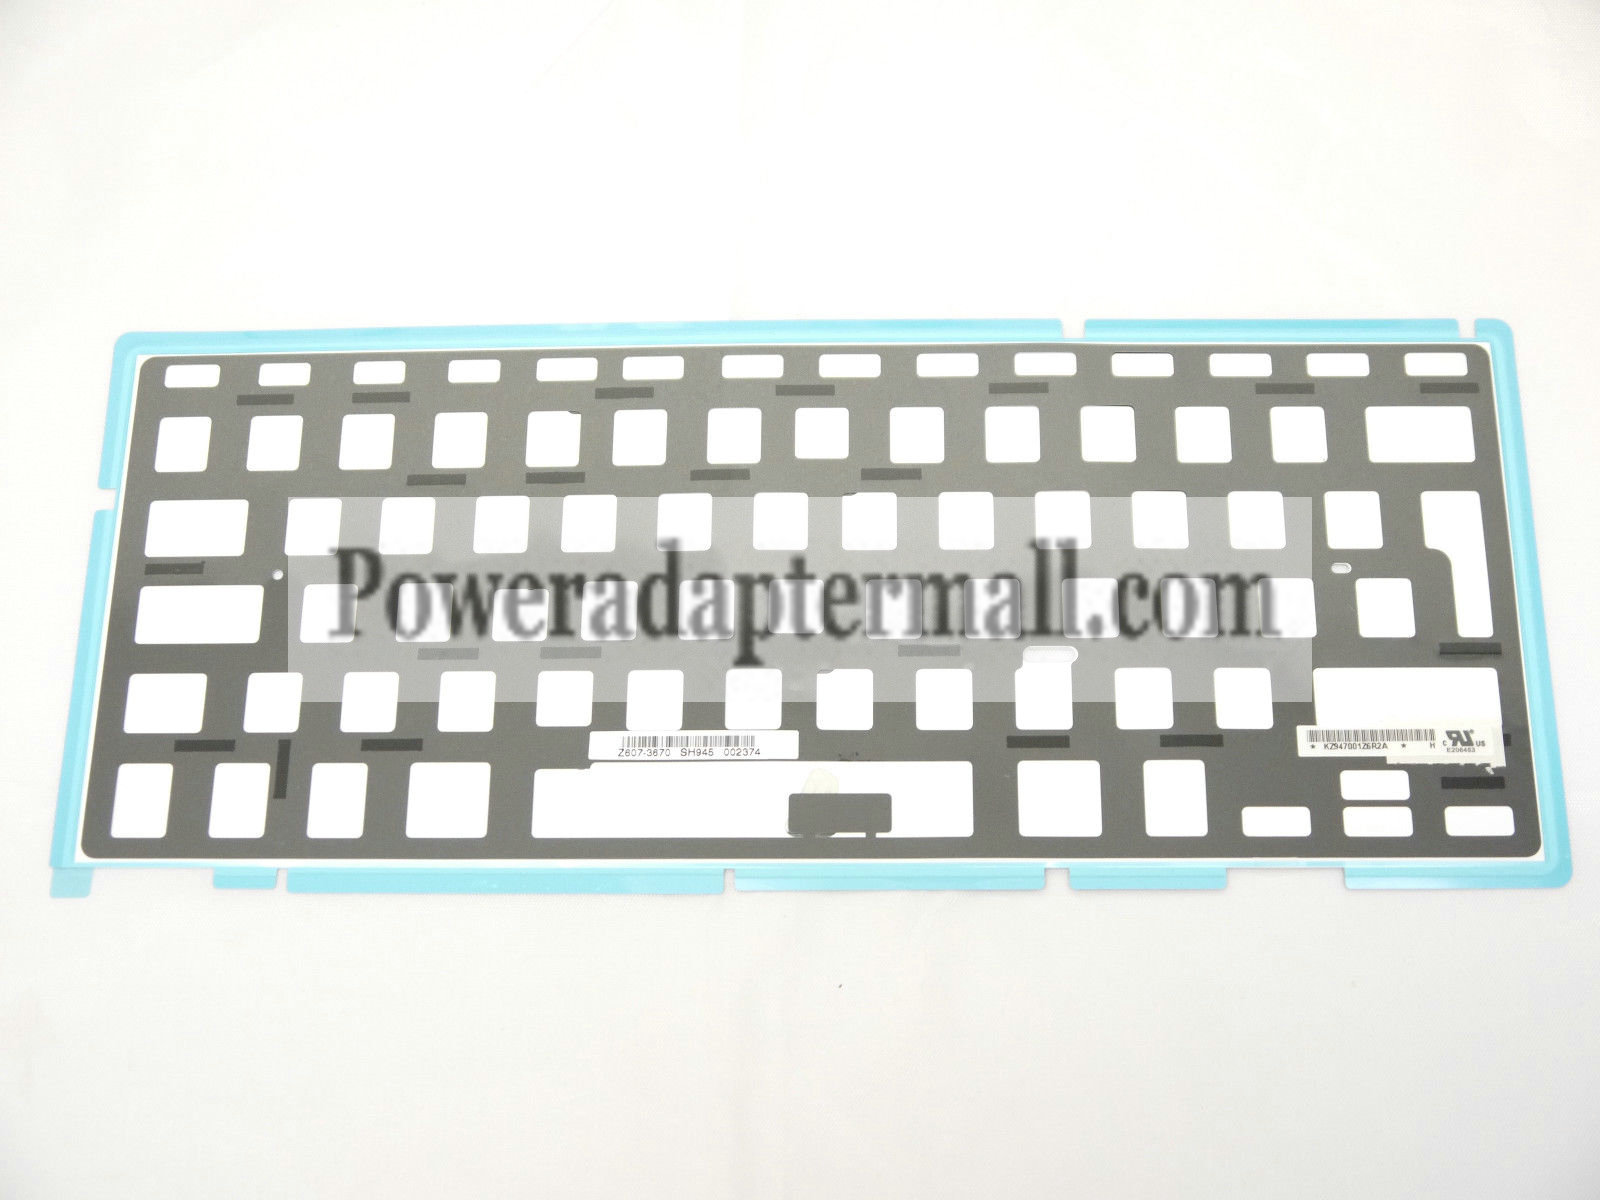 NEW Backlit Backlight for MacBook Pro 17" A1297 2009 2010 2011 - Click Image to Close